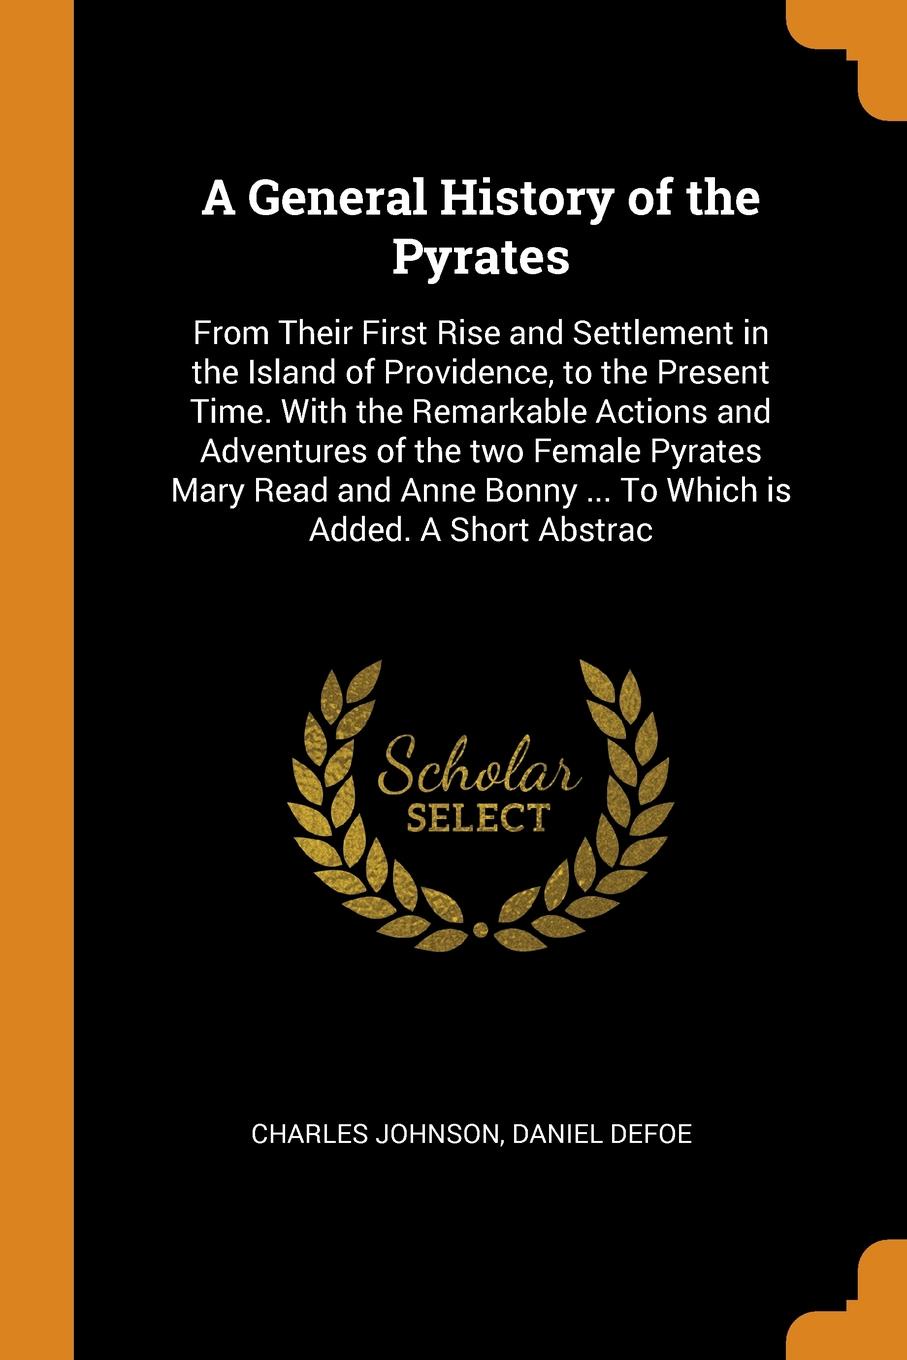 A General History of the Pyrates. From Their First Rise and Settlement in the Island of Providence, to the Present Time. With the Remarkable Actions and Adventures of the two Female Pyrates Mary Read and Anne Bonny ... To Which is Added. A Short A...